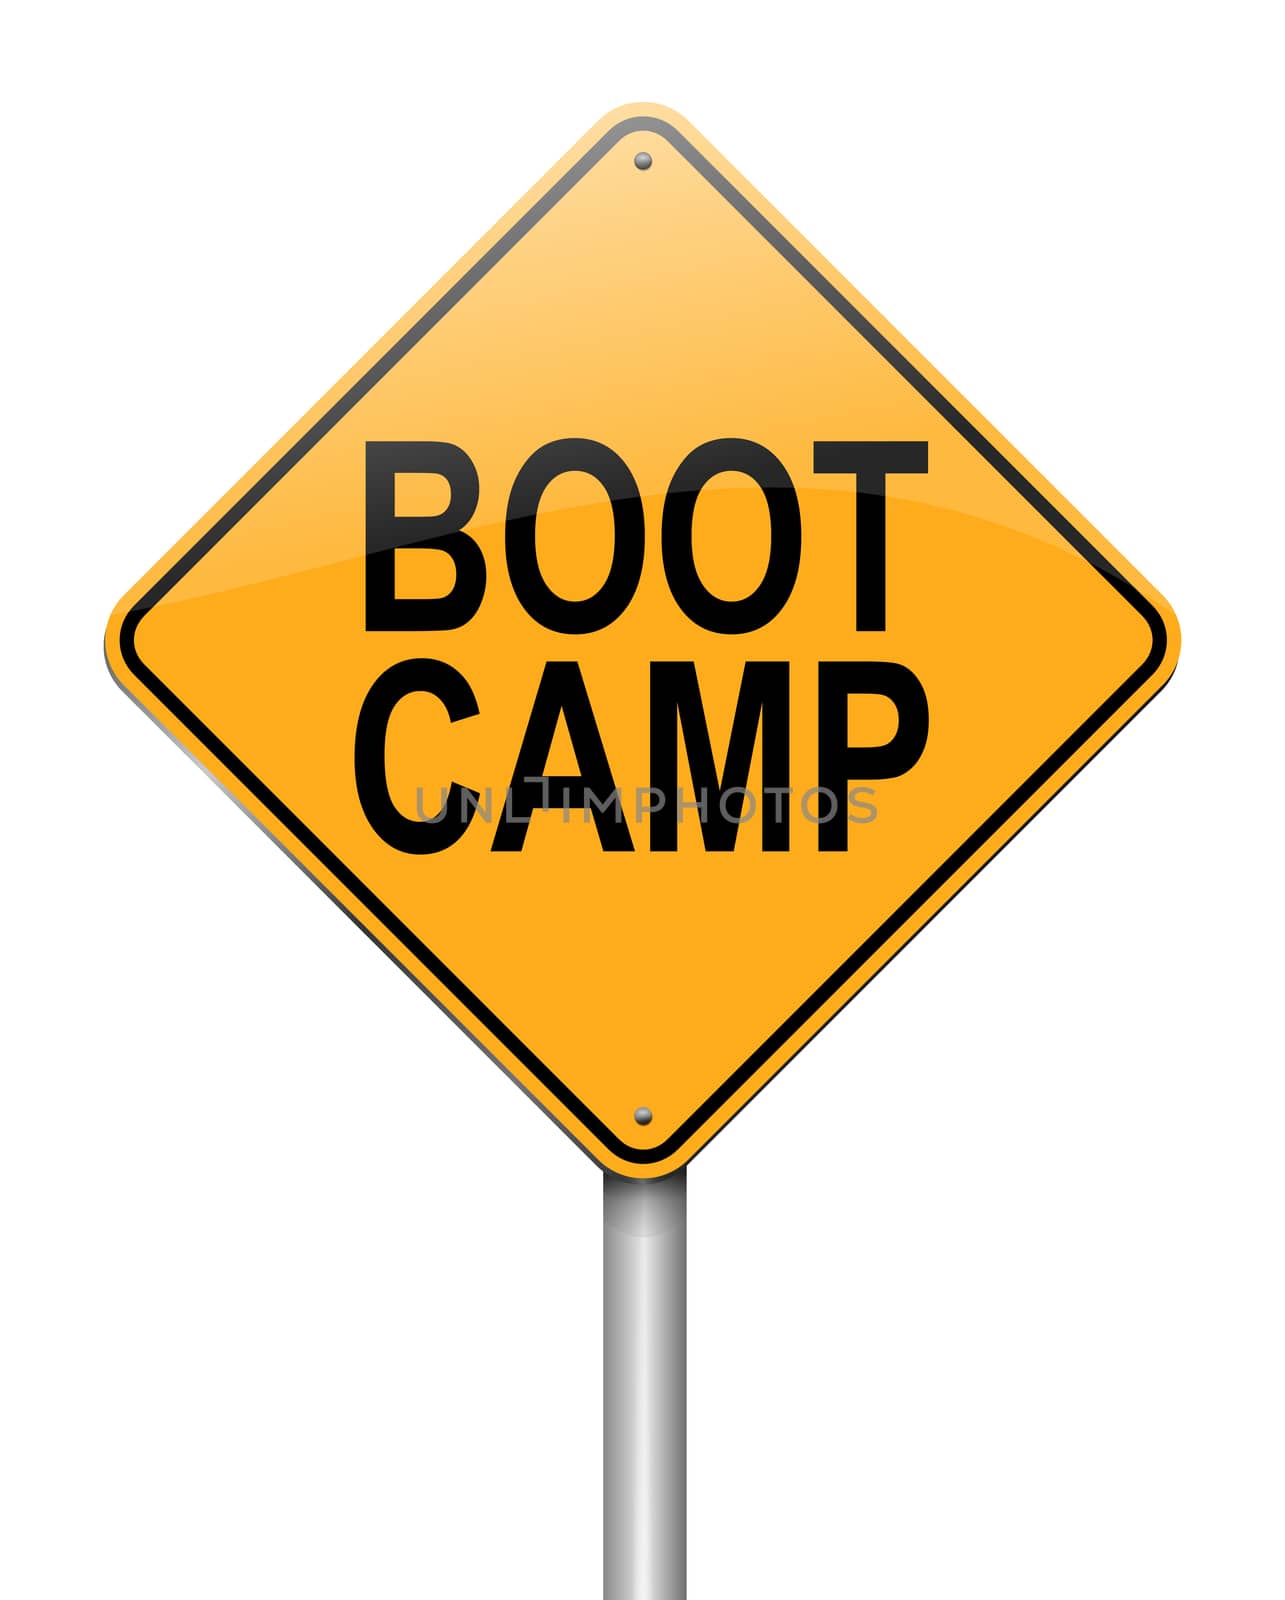 Boot camp concept. by 72soul